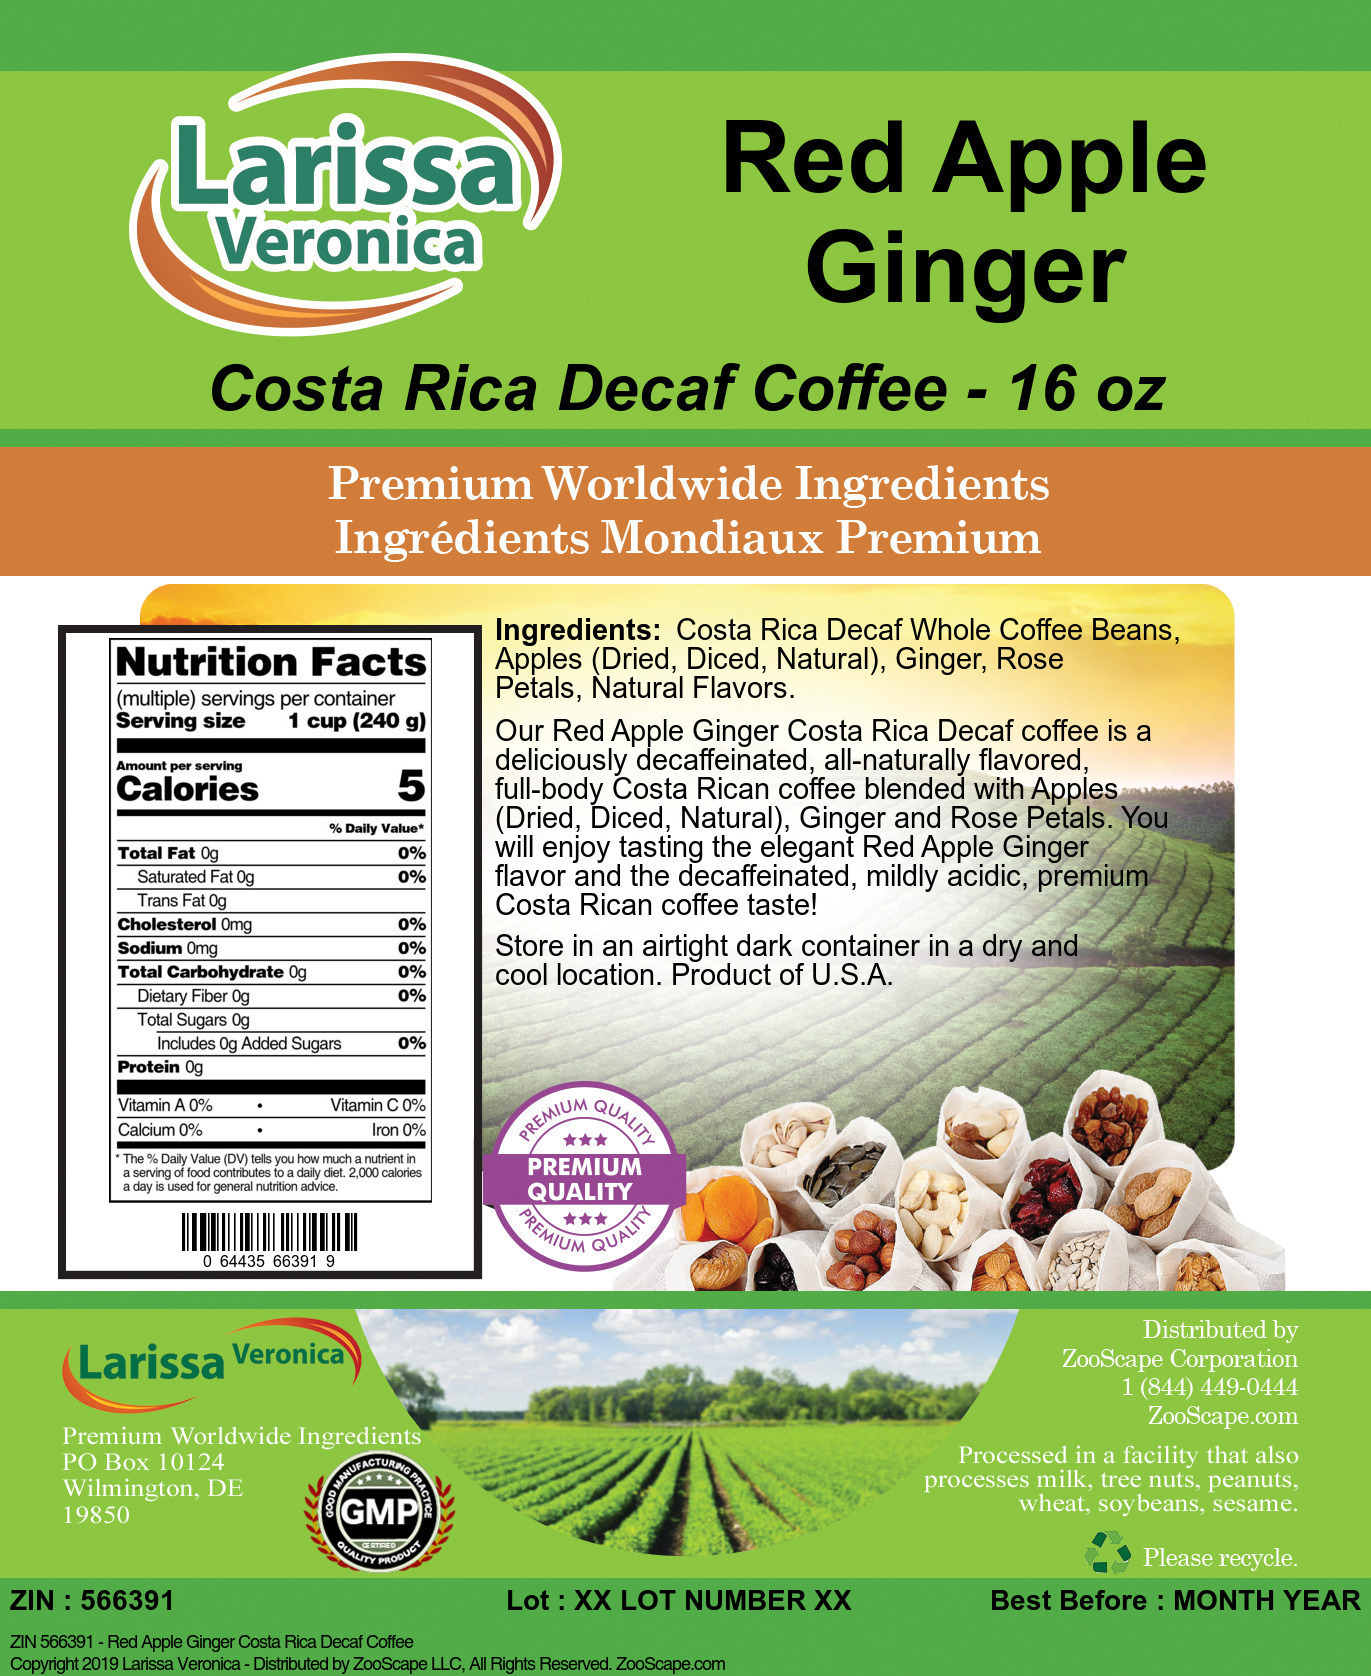 Red Apple Ginger Costa Rica Decaf Coffee - Label